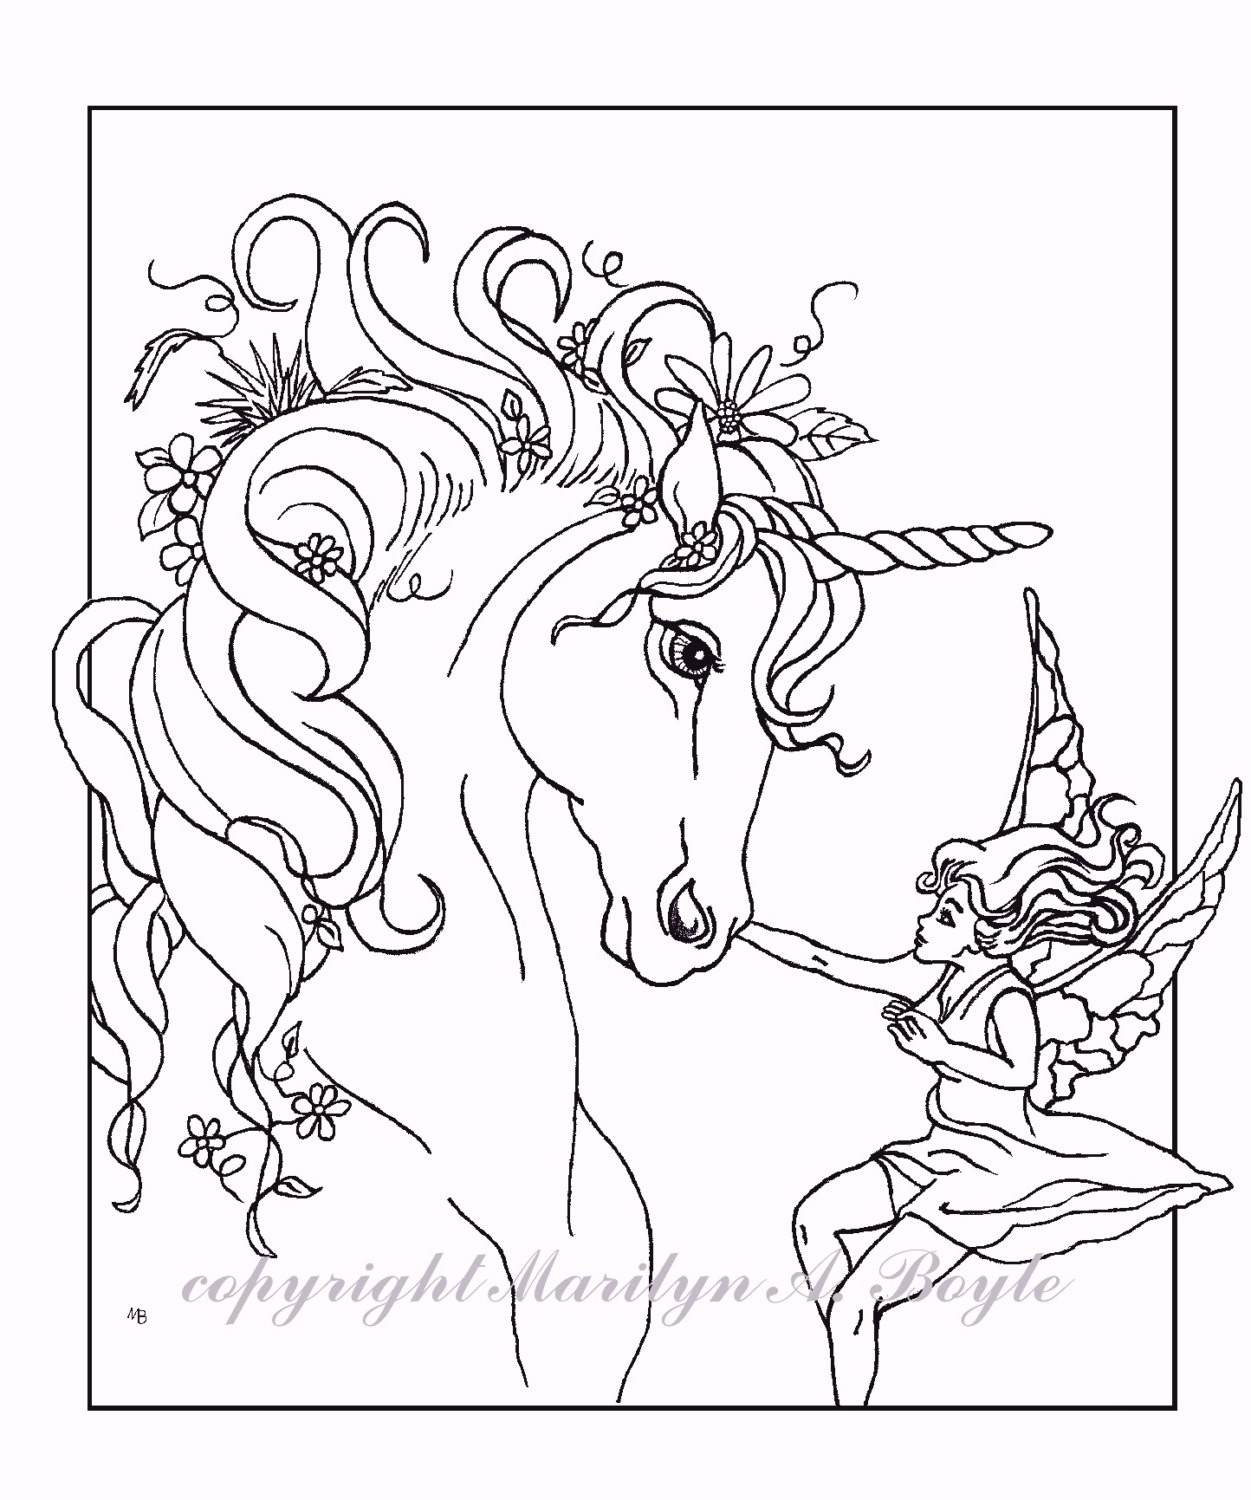 Free Unicorn Coloring Pages For Adults
 ADULT COLORING PAGE fantasy unicorn fairy digital